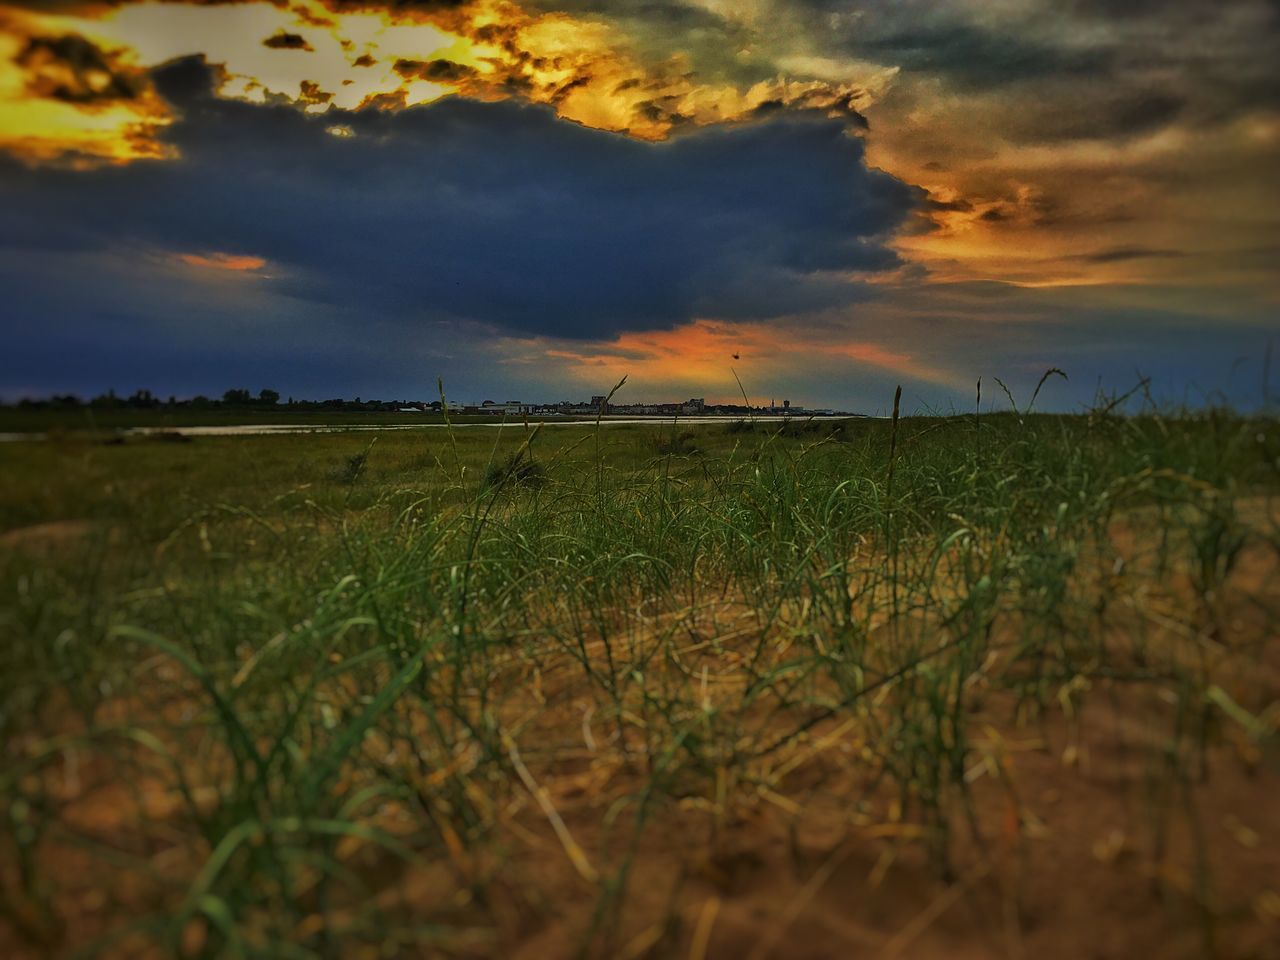 sunset, tranquil scene, sky, scenics, tranquility, beauty in nature, cloud - sky, landscape, field, nature, cloudy, idyllic, cloud, grass, orange color, dramatic sky, weather, horizon over land, plant, growth, rural scene, outdoors, non-urban scene, remote, no people, overcast, non urban scene, majestic